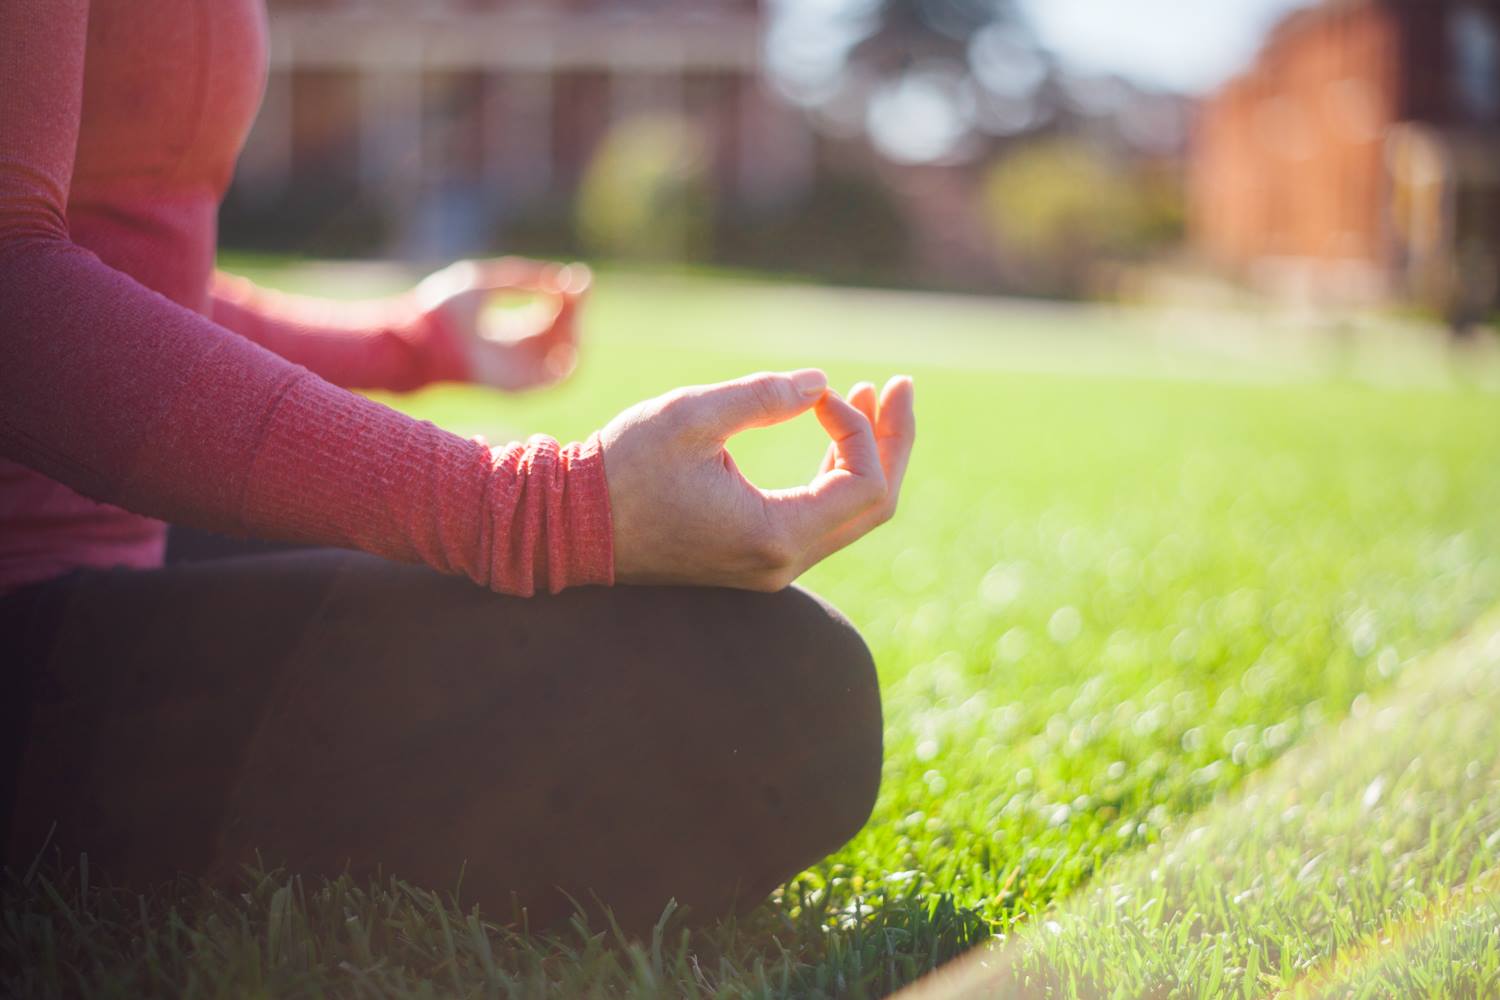 6 Amazing Benefits of Loving Kindness Meditation Backed by Science